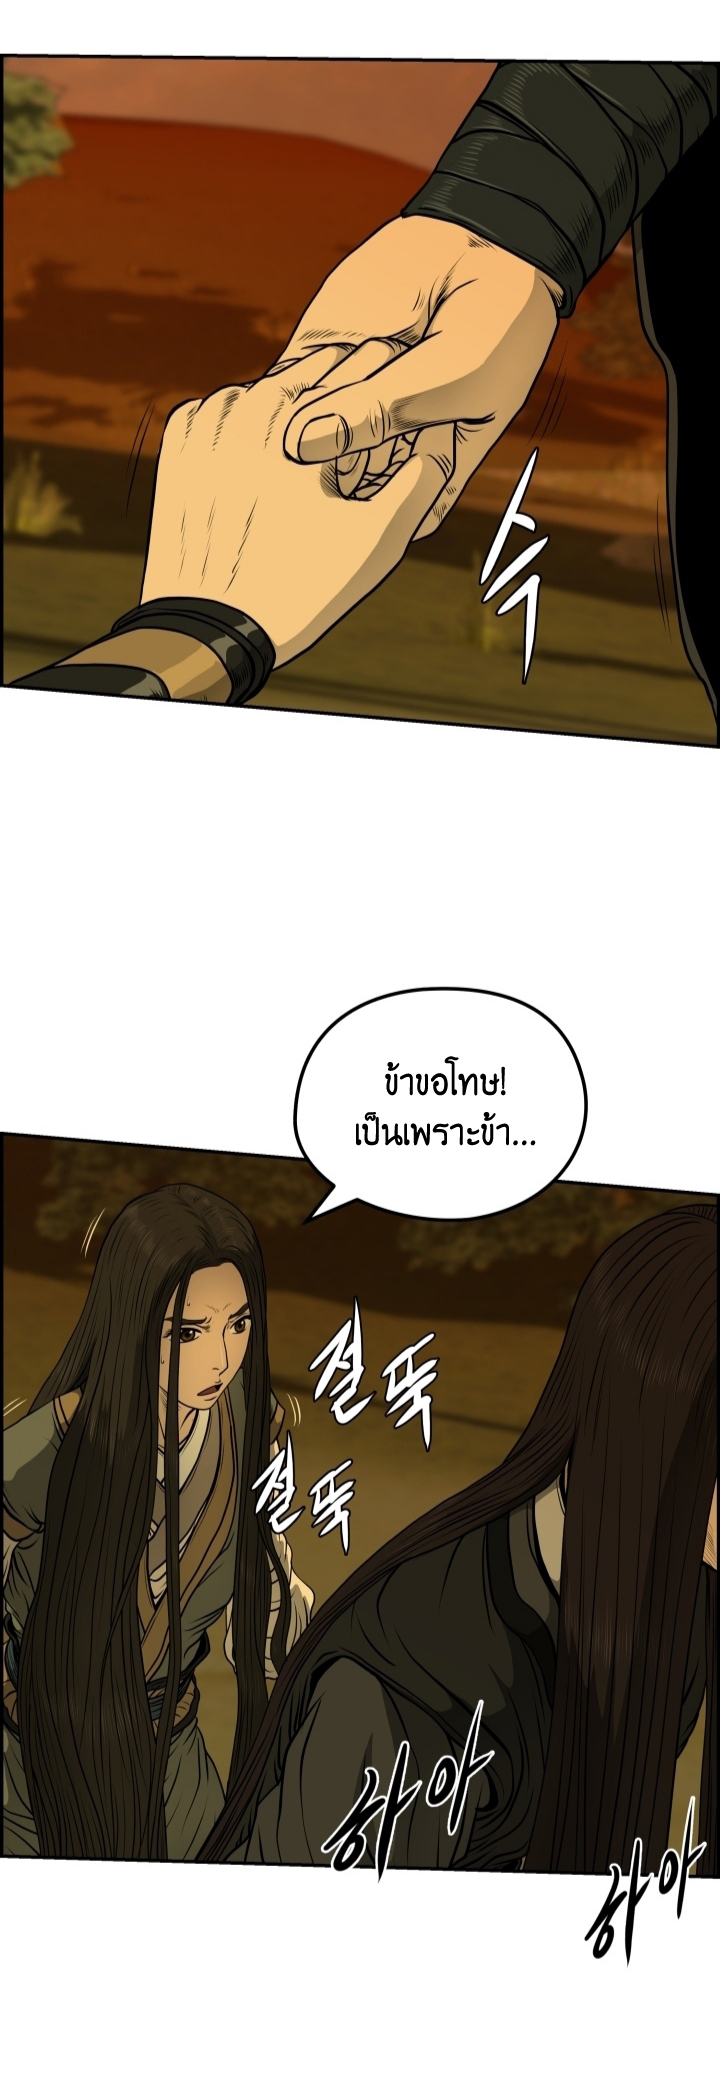 Blade of Wind and Thunder 28 (6)